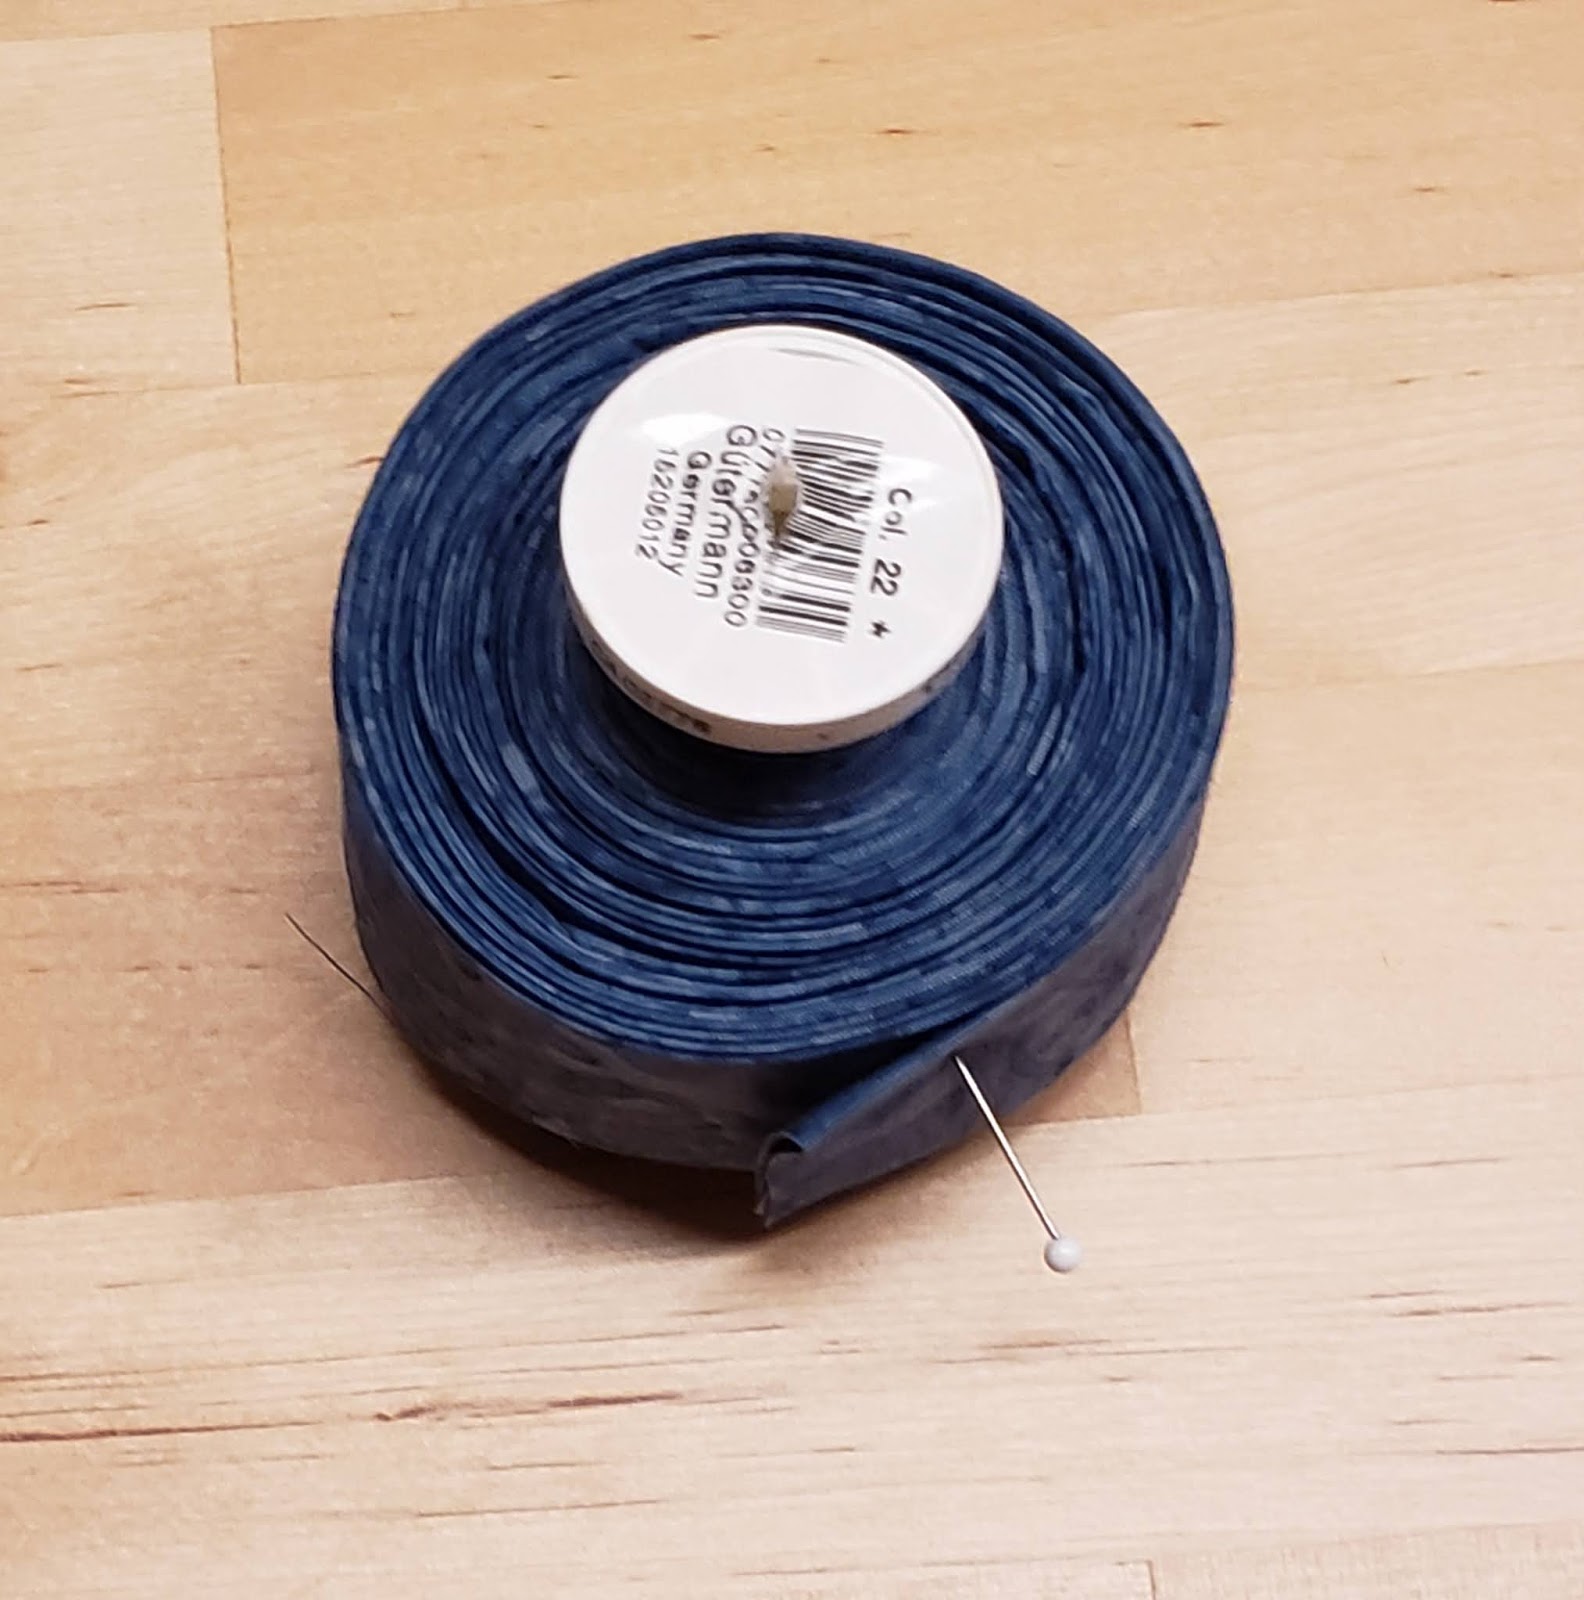 Refill & Reuse Old Sewing Thread Spools Using a Sewing Machine 